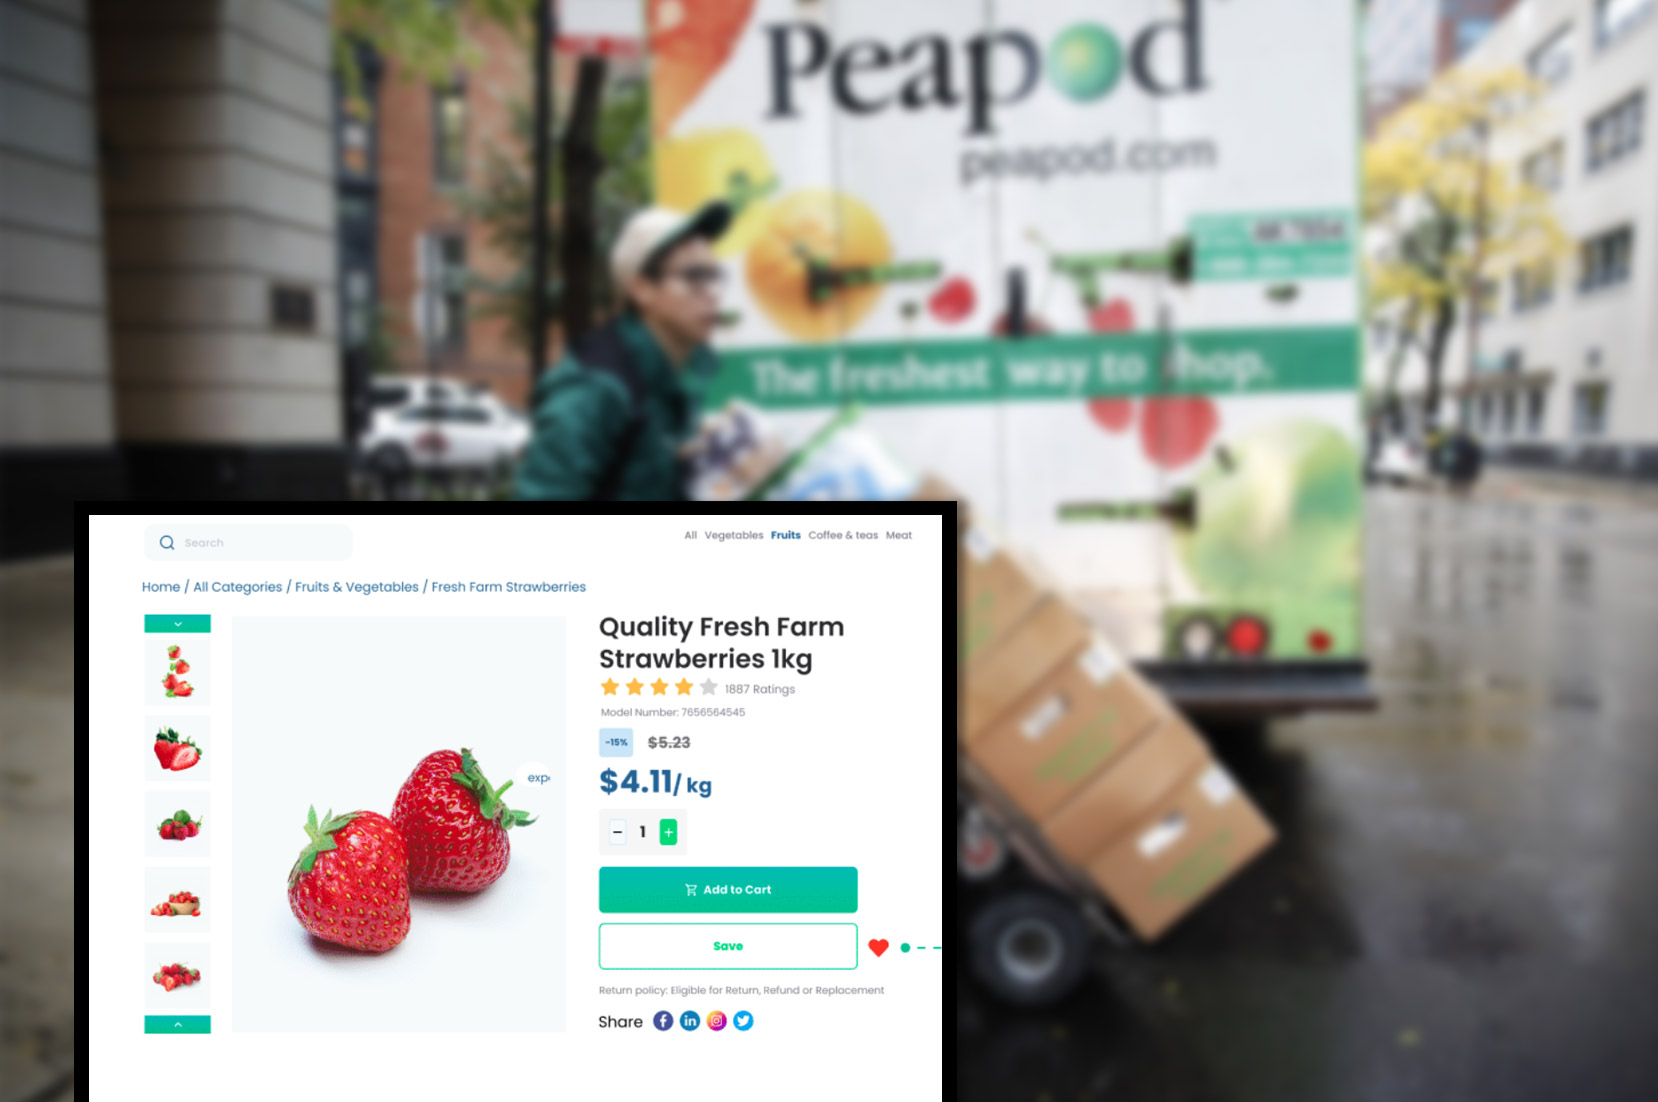 peapod-comproduct-pricing-information-and-image-scraping-services